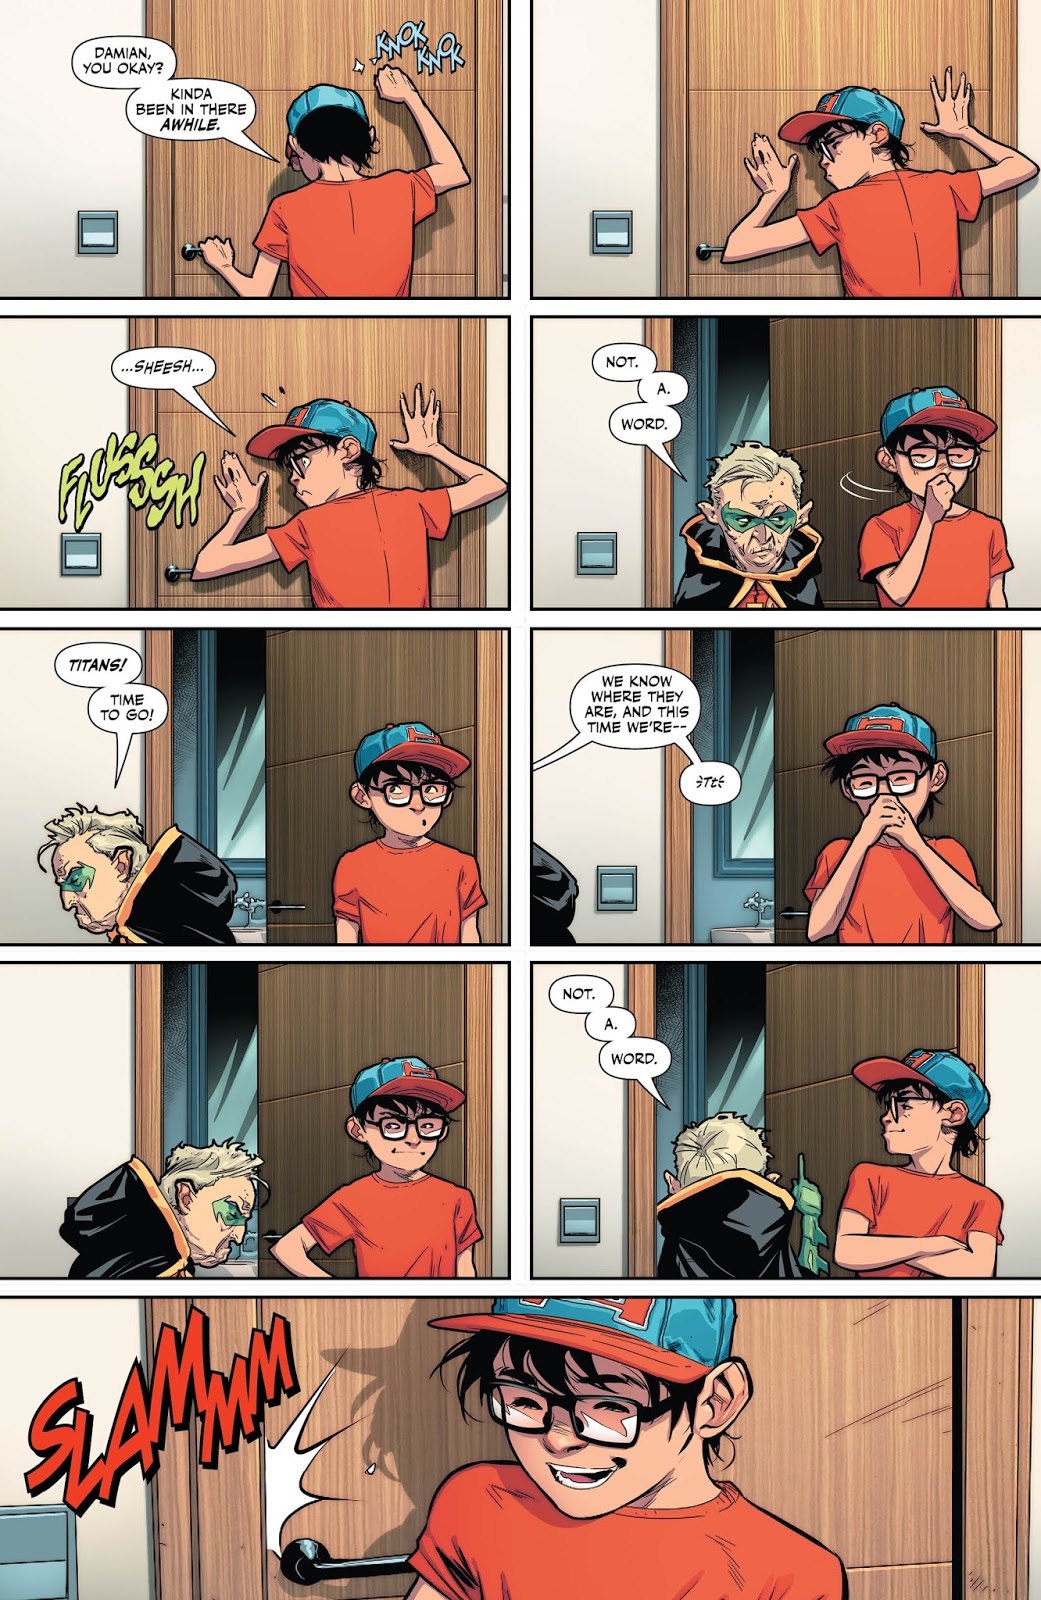 Weird Science Dc Comics Preview Super Sons